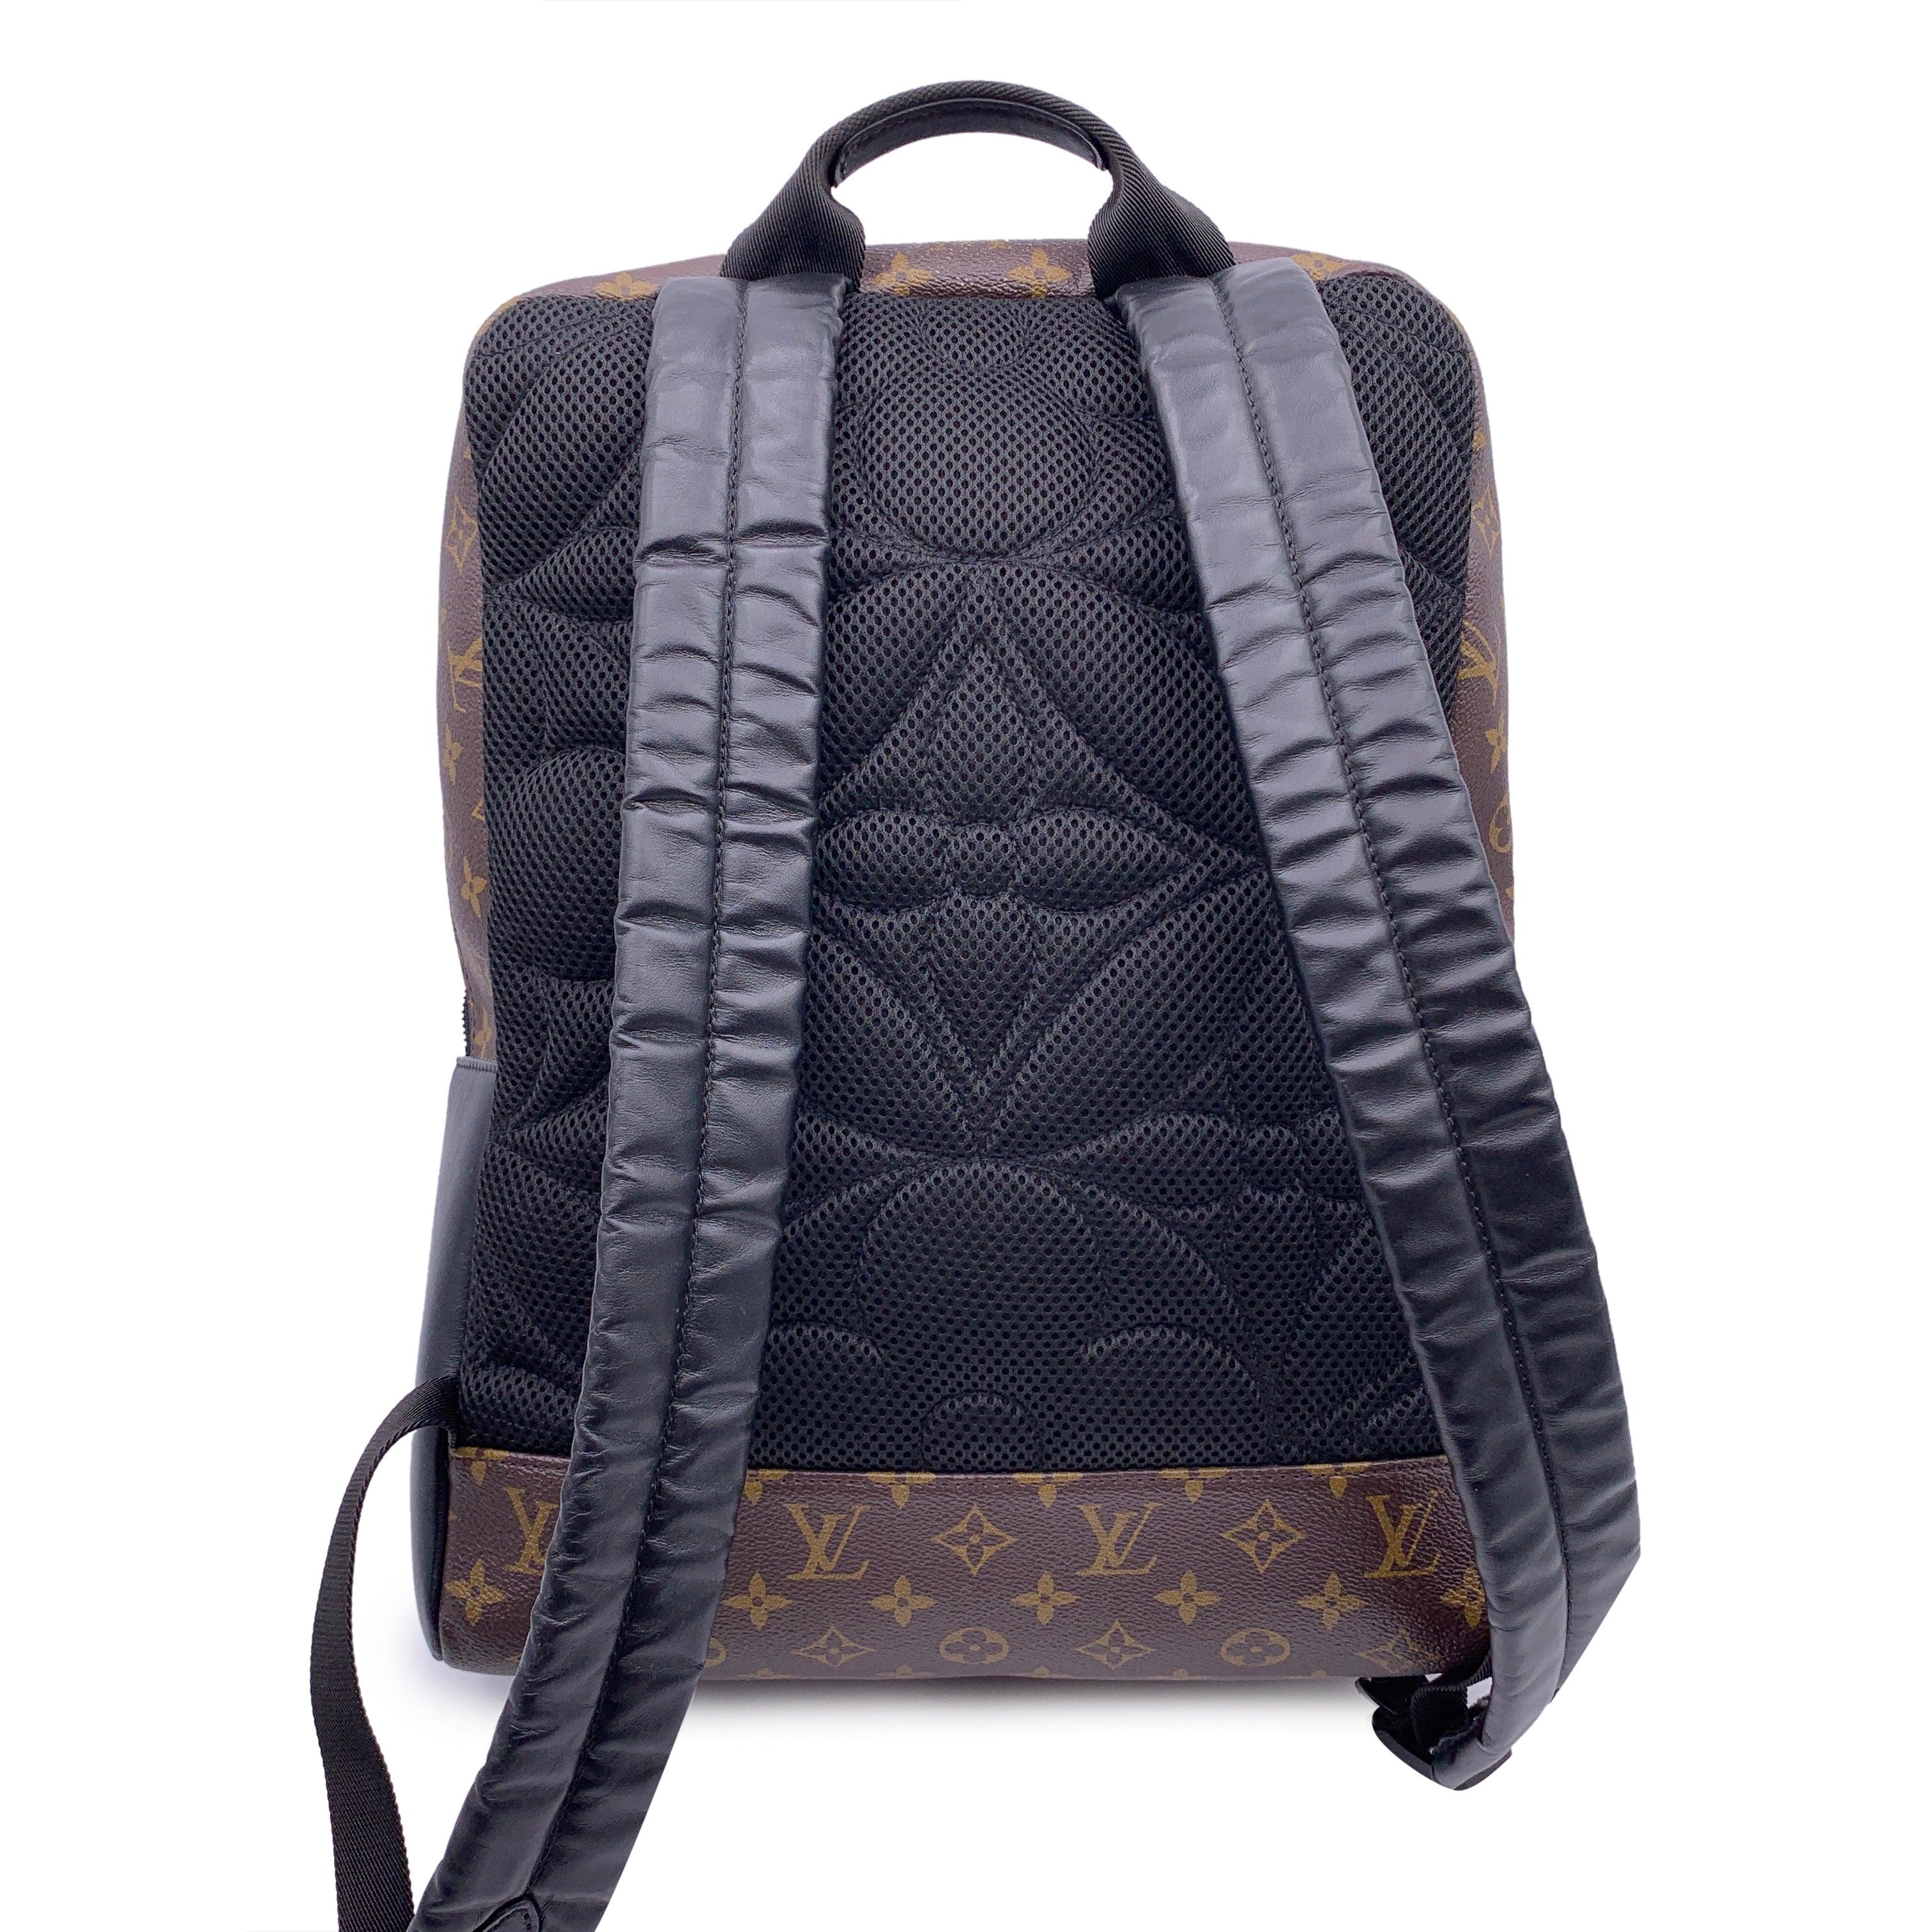 Louis Vuitton Monogram Macassar Canvas Dean Backpack Bag M45335 In Excellent Condition For Sale In Rome, Rome